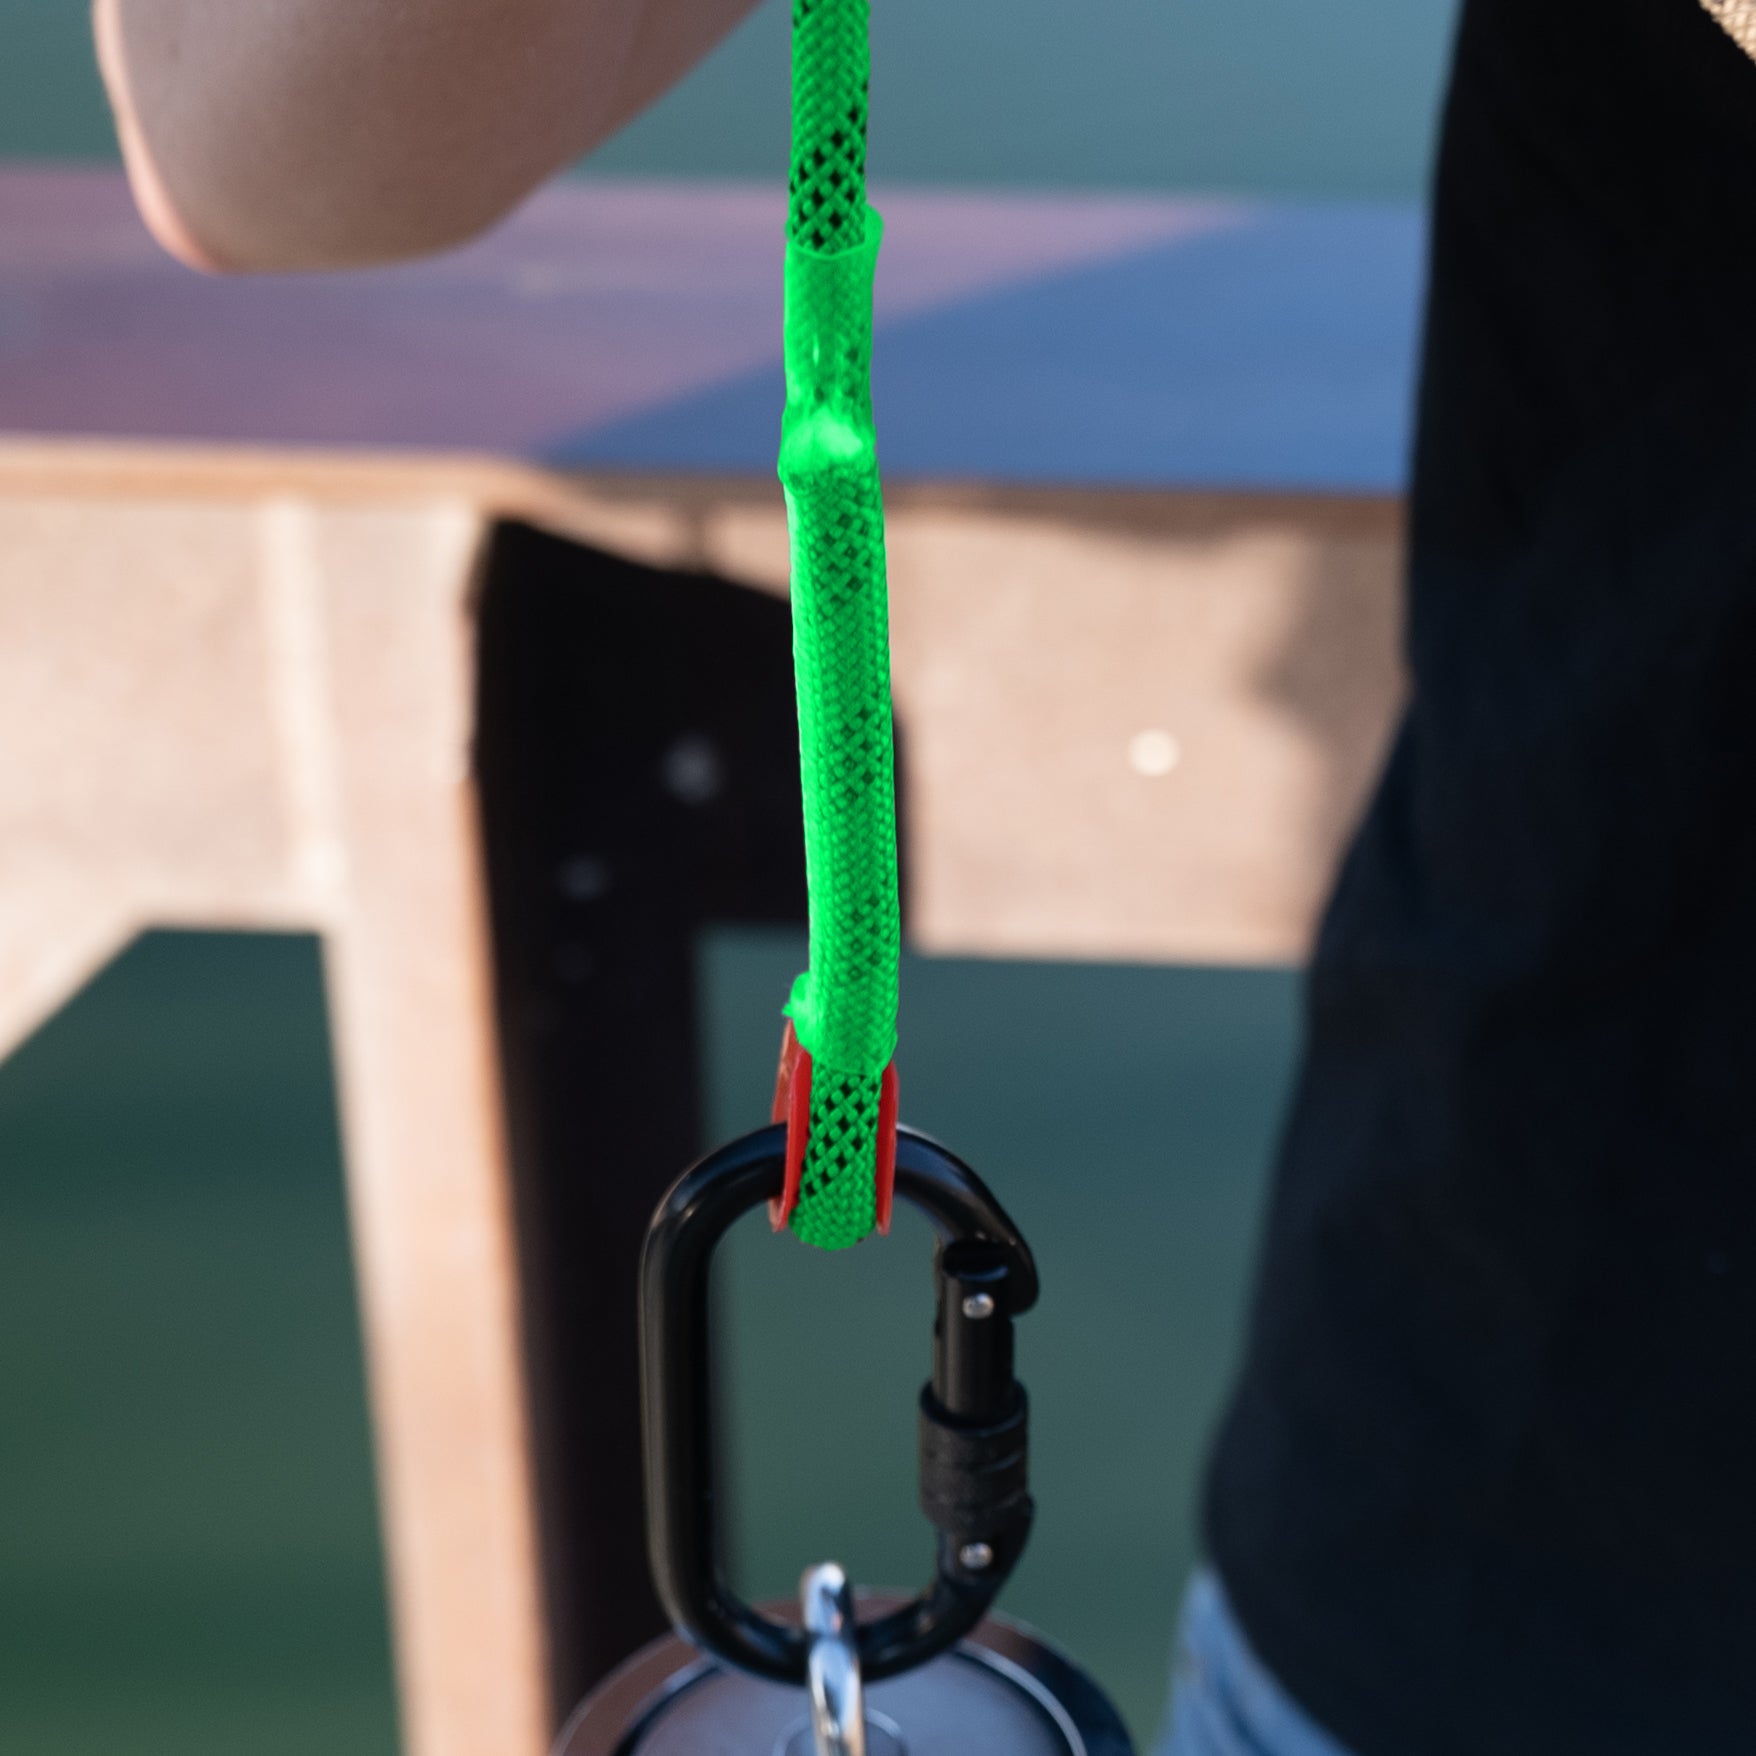 Strongest Magnet Fishing Rope